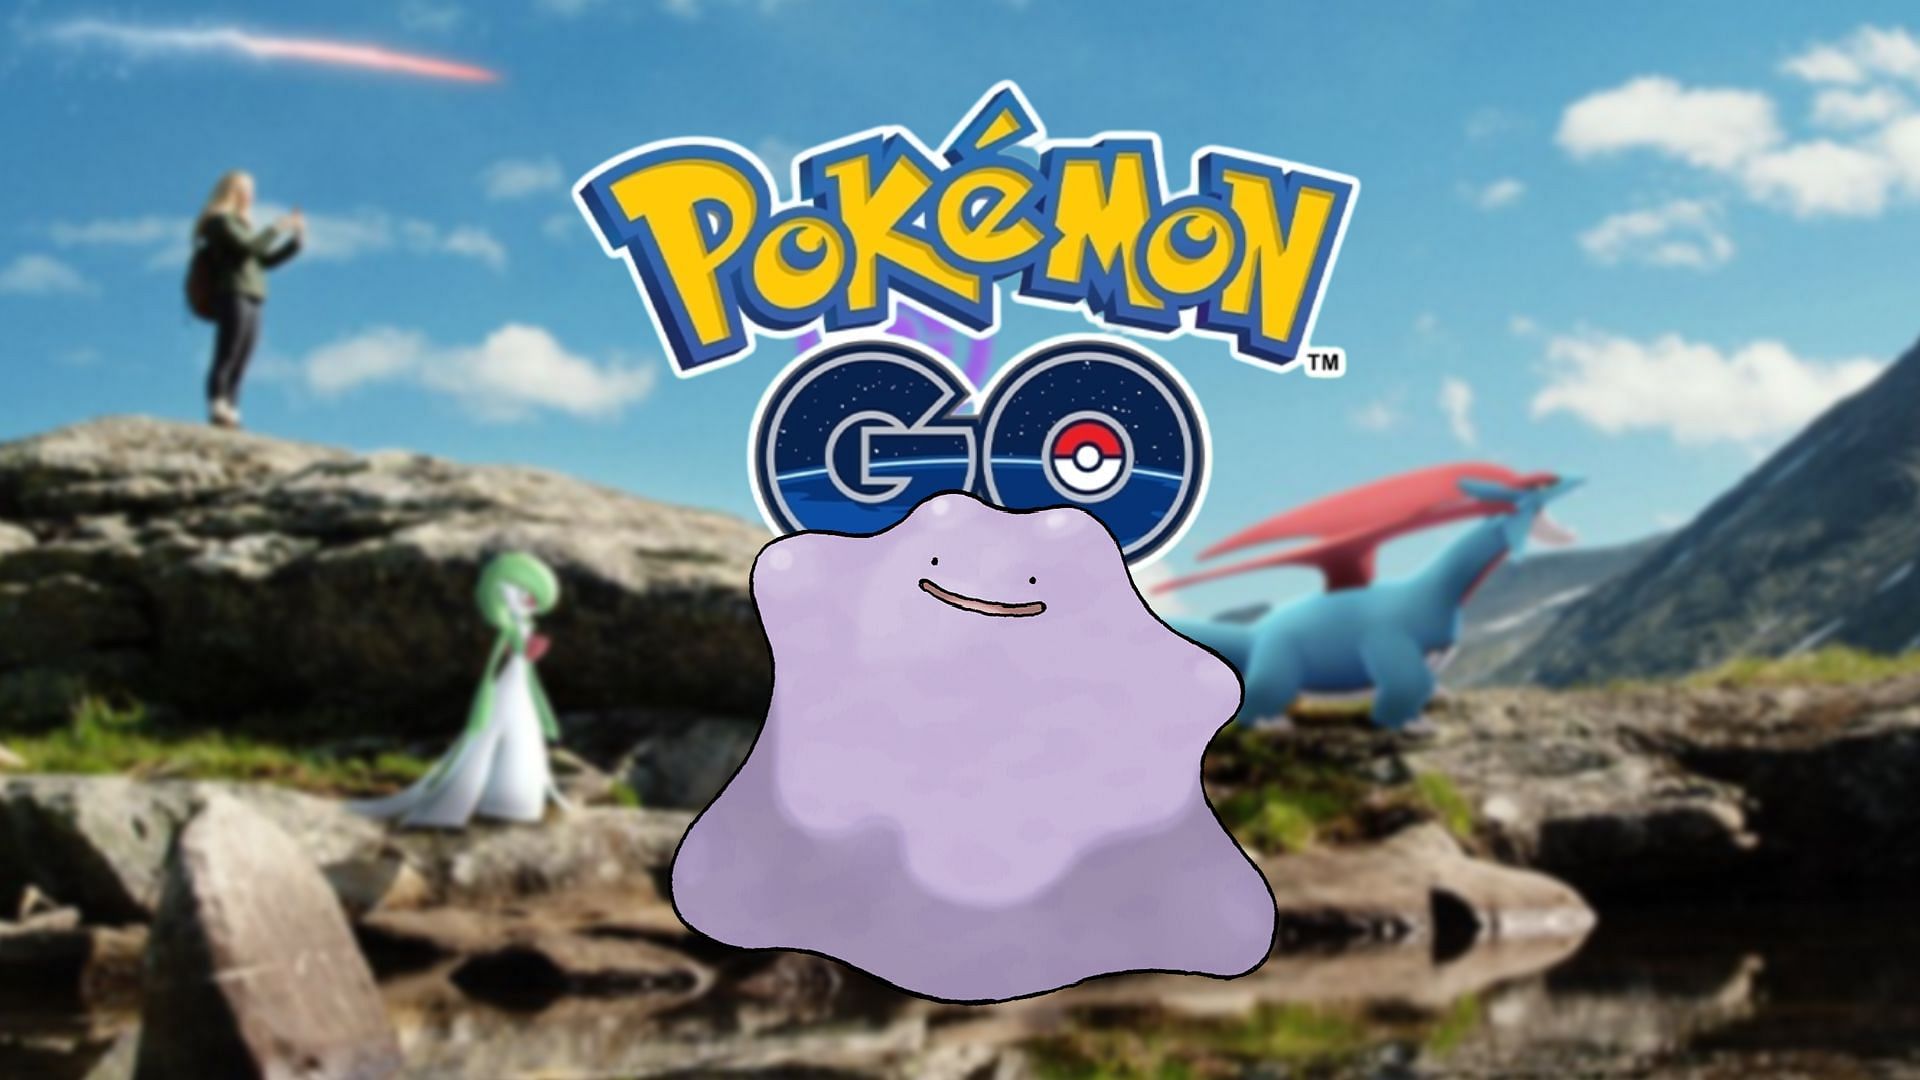 How to catch Ditto in Pokemon GO (January 2023)